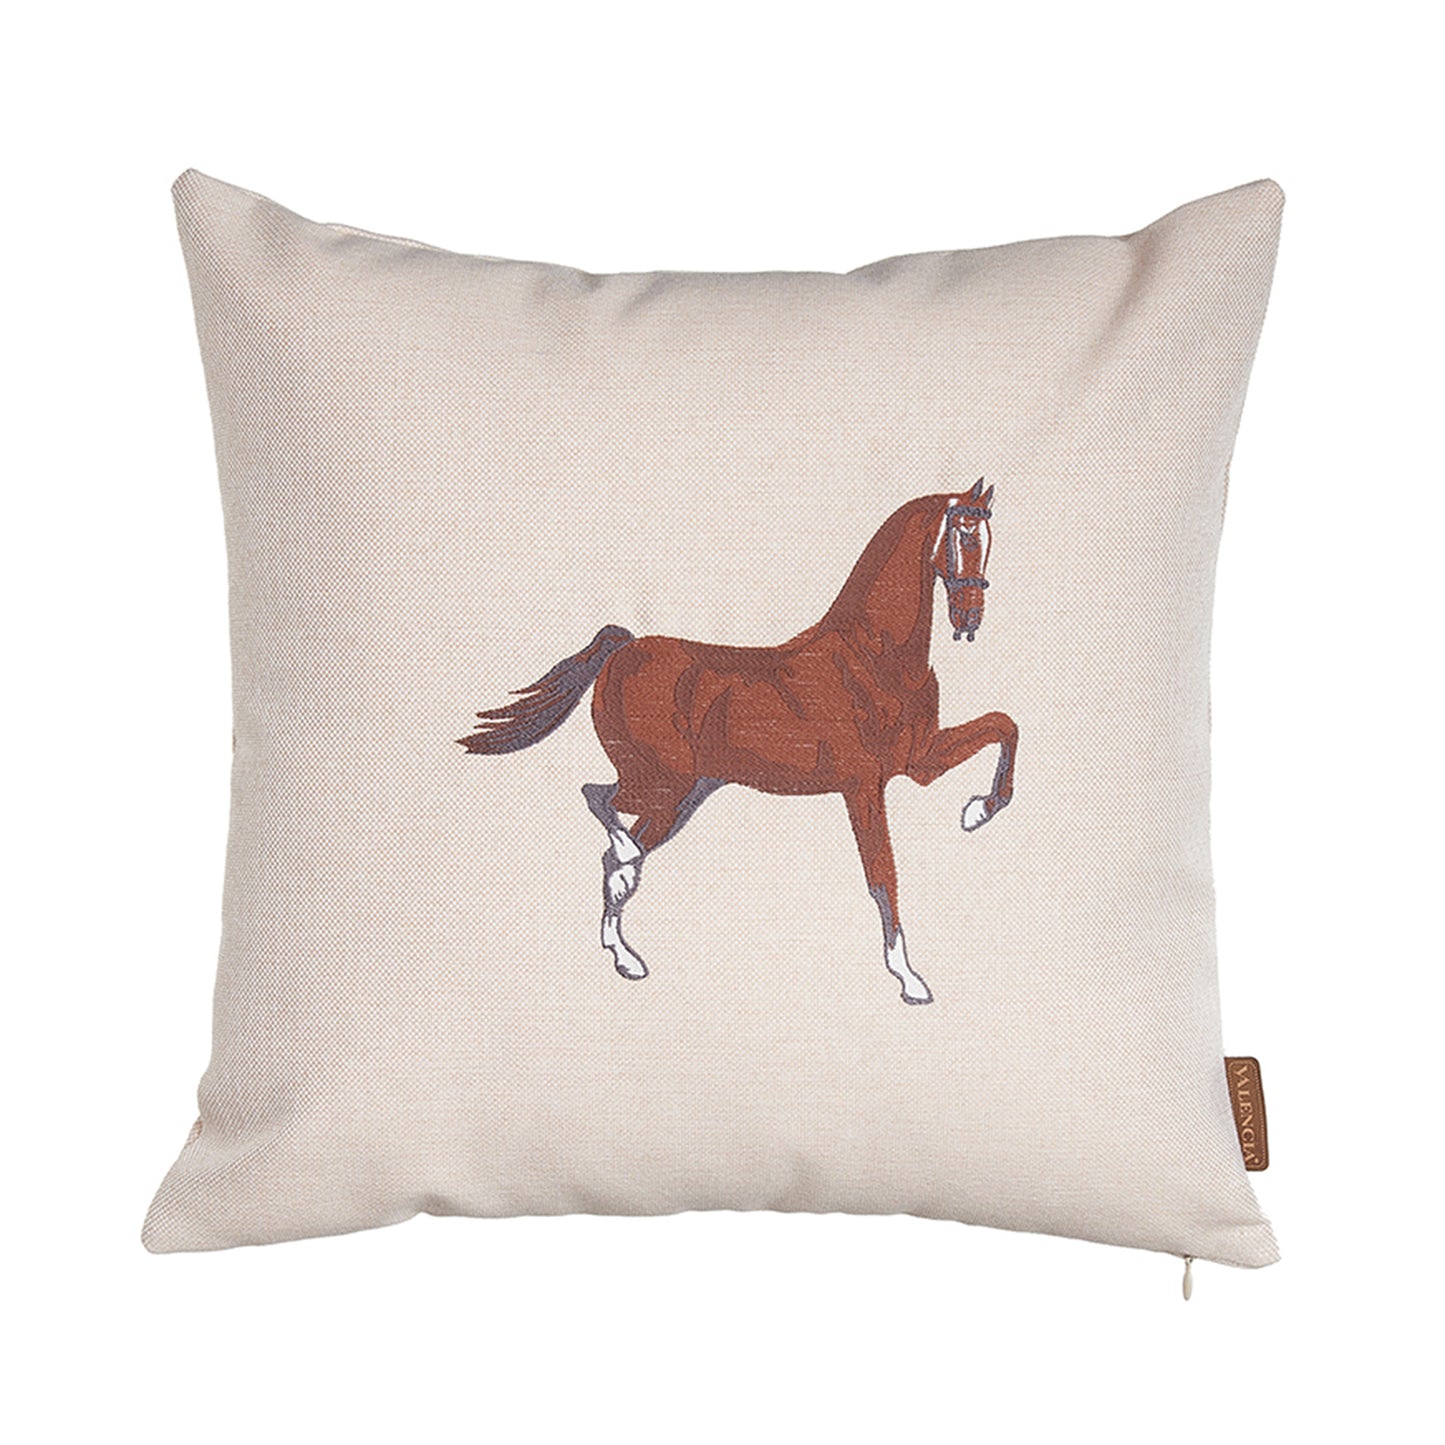 Boho Embroidered Horse Throw Pillow 18" x 18" Solid Beige & Brown Square for Couch, Bedding